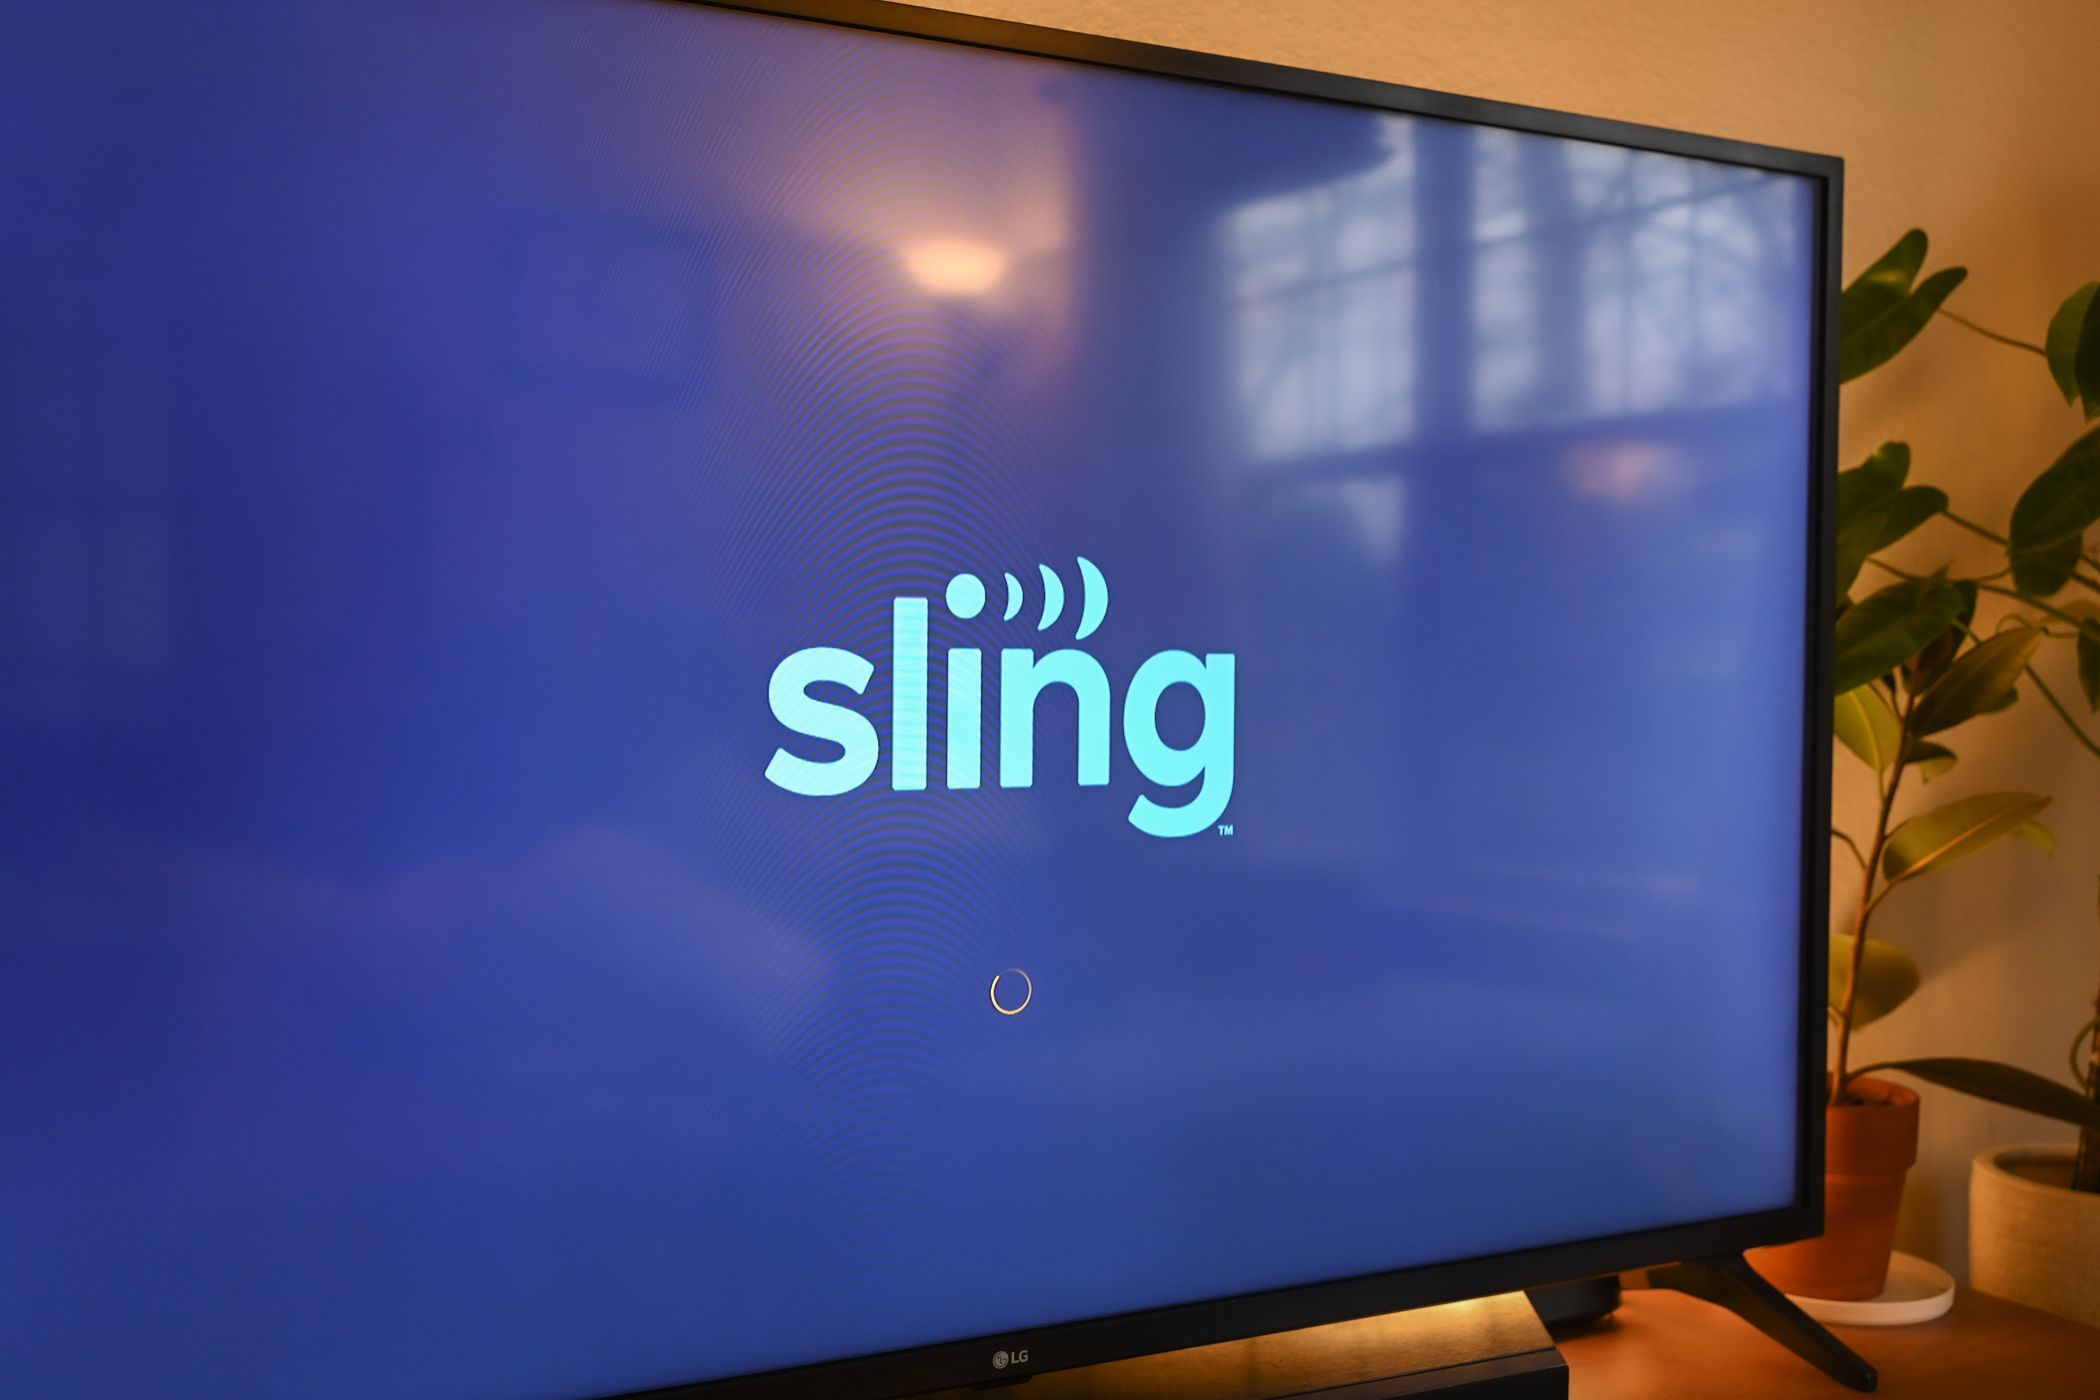 Sling TV streaming app opening on a TV